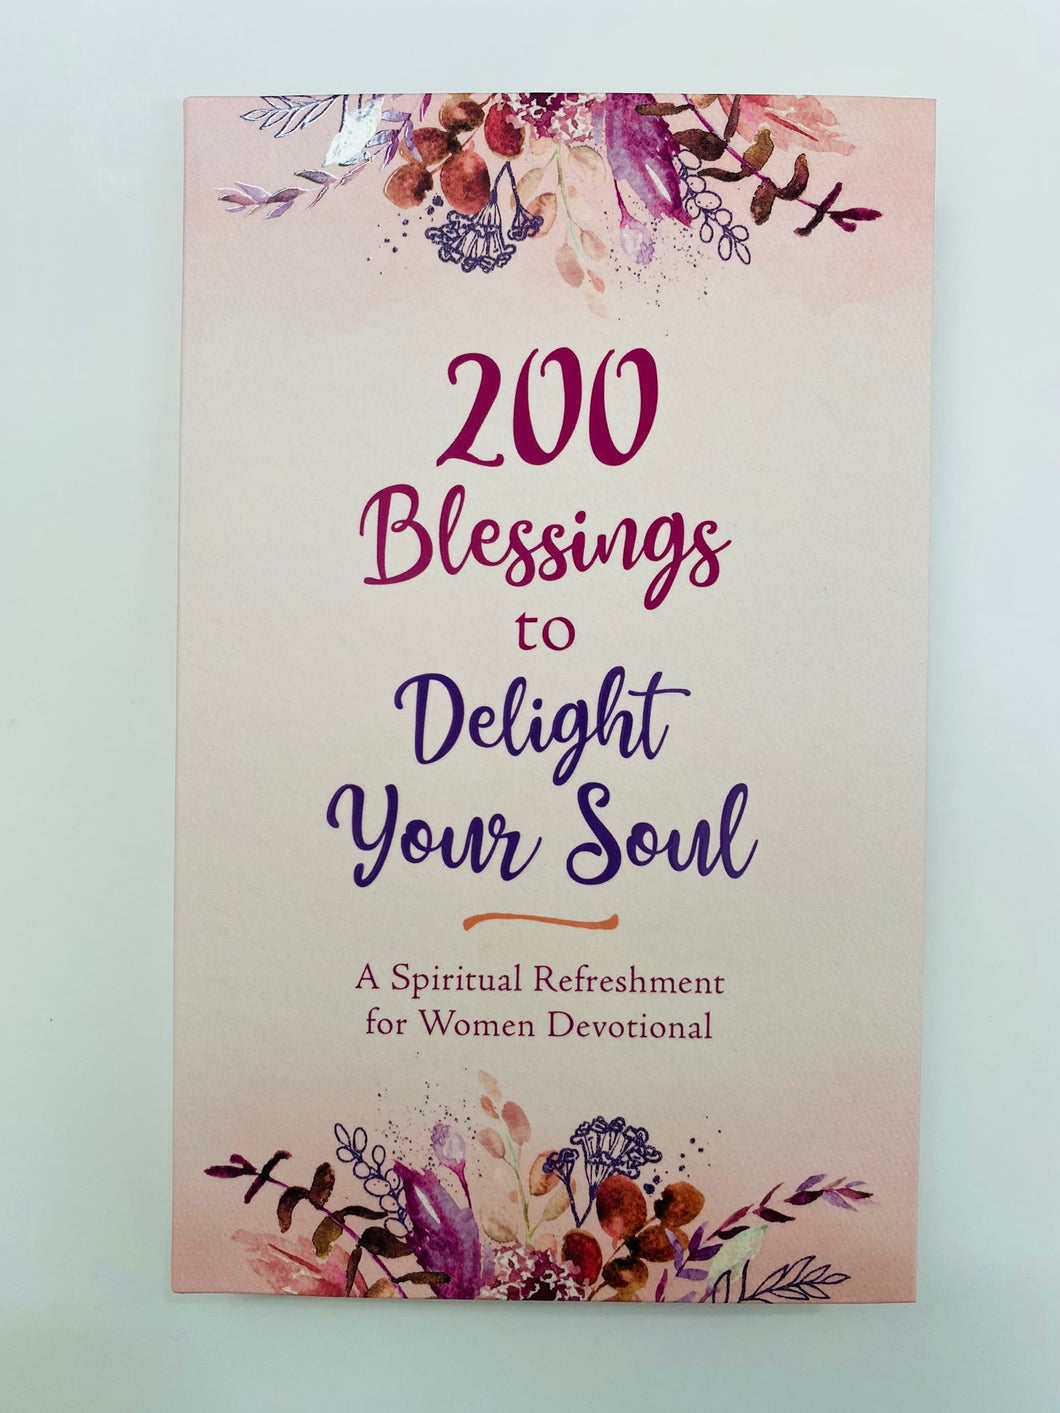 200 Blessings to Delight your Soul